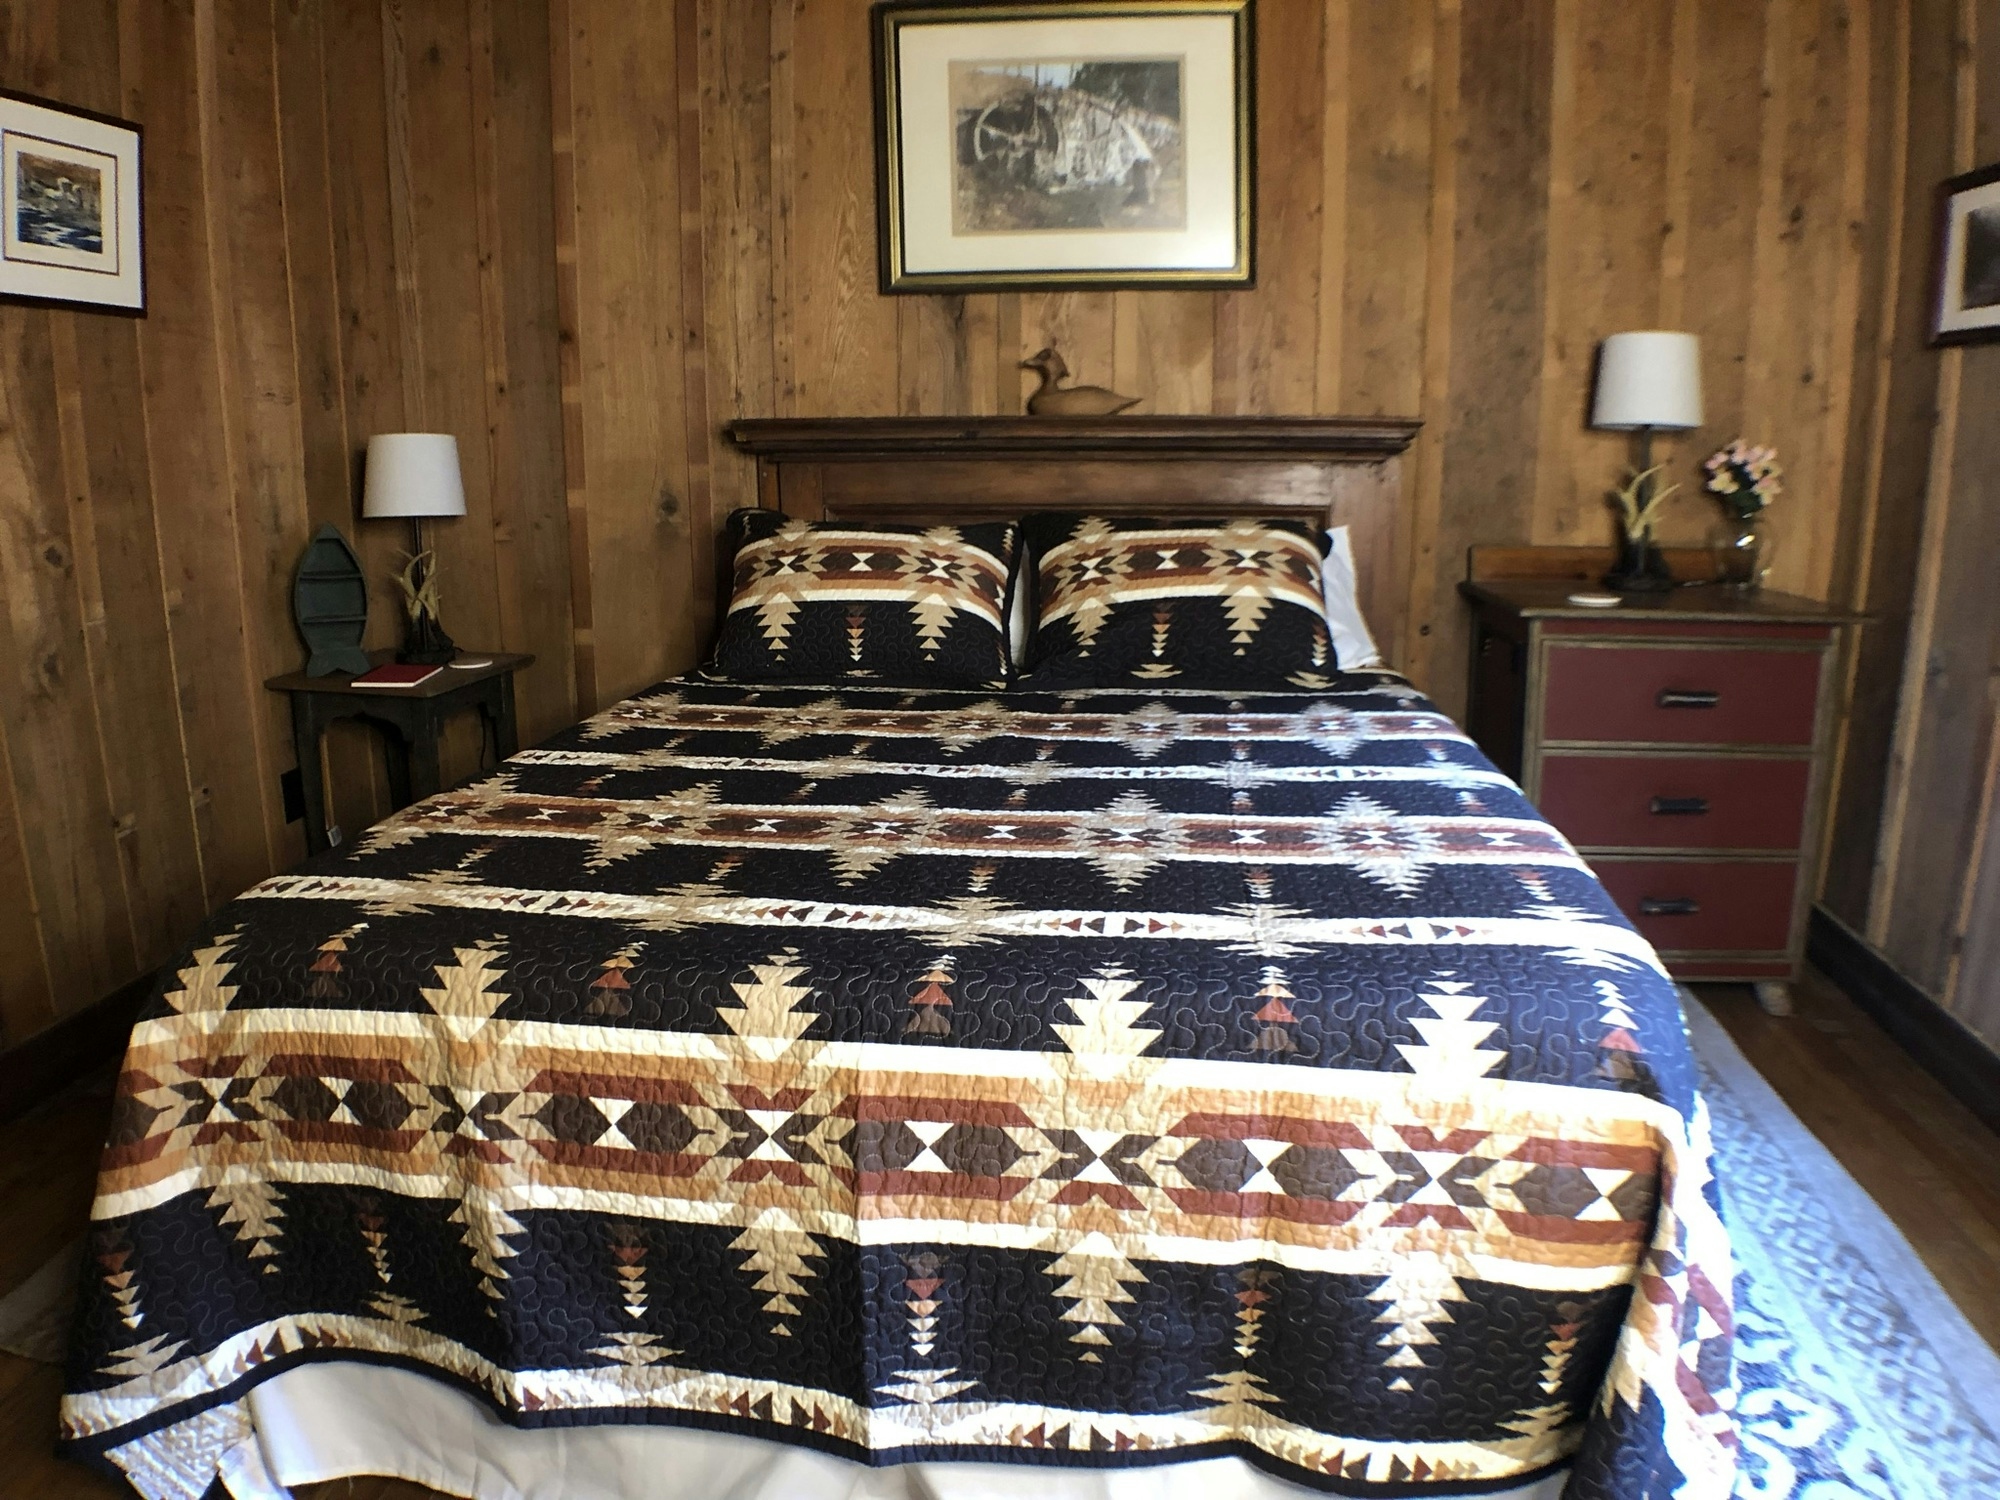 Rustic bedroom with a patterned bedspread, wooden headboard, and wooden walls.